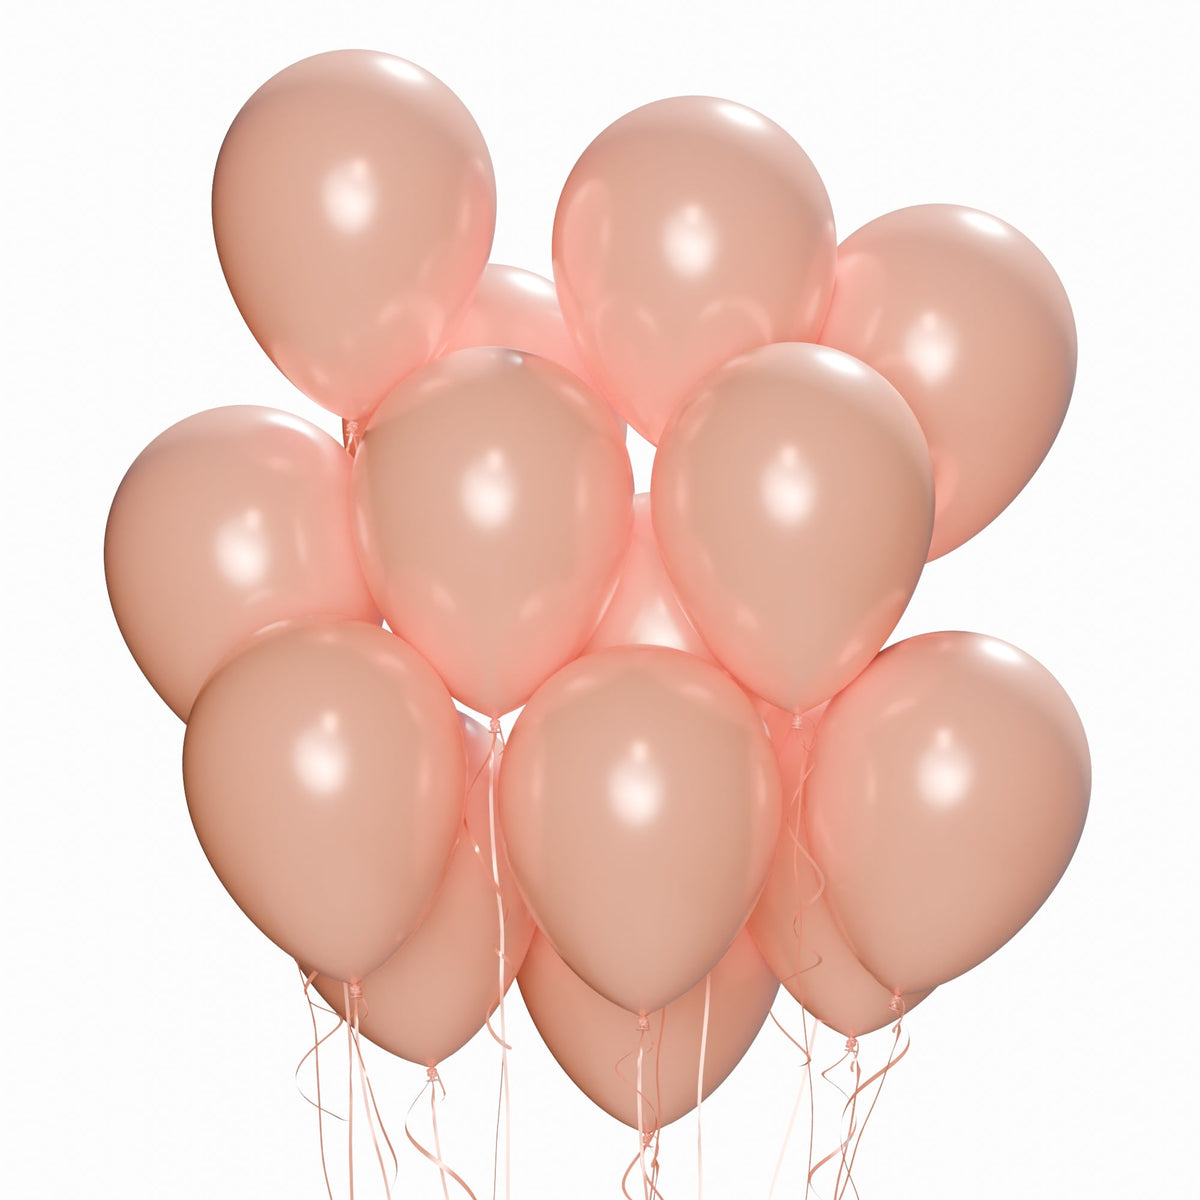 WIDE OCEAN INTERNATIONAL TRADE BEIJING CO., LTD Balloons Rosegold Latex Balloon 12 Inches, Pearl Collection, 15 Count 810064198342